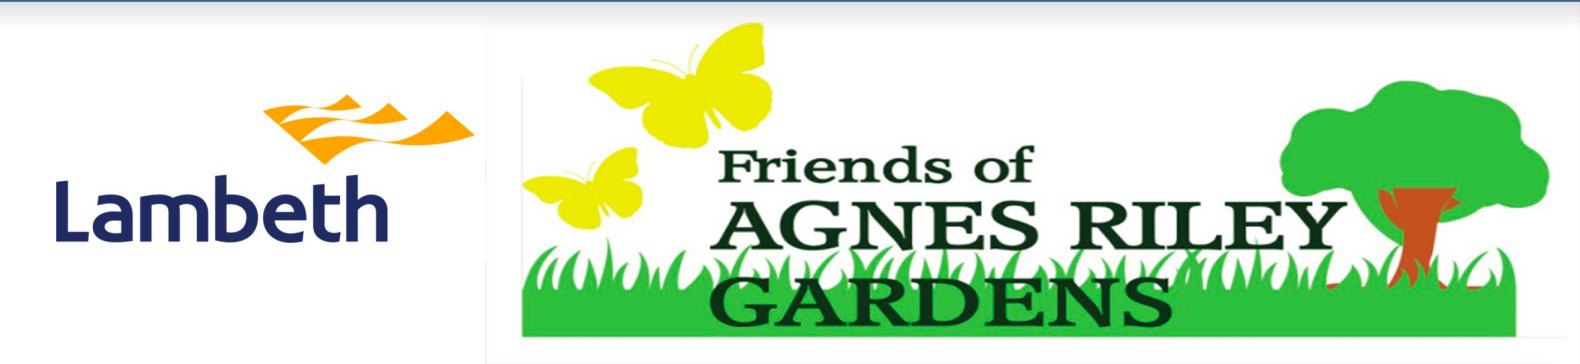 friends of agnes riley